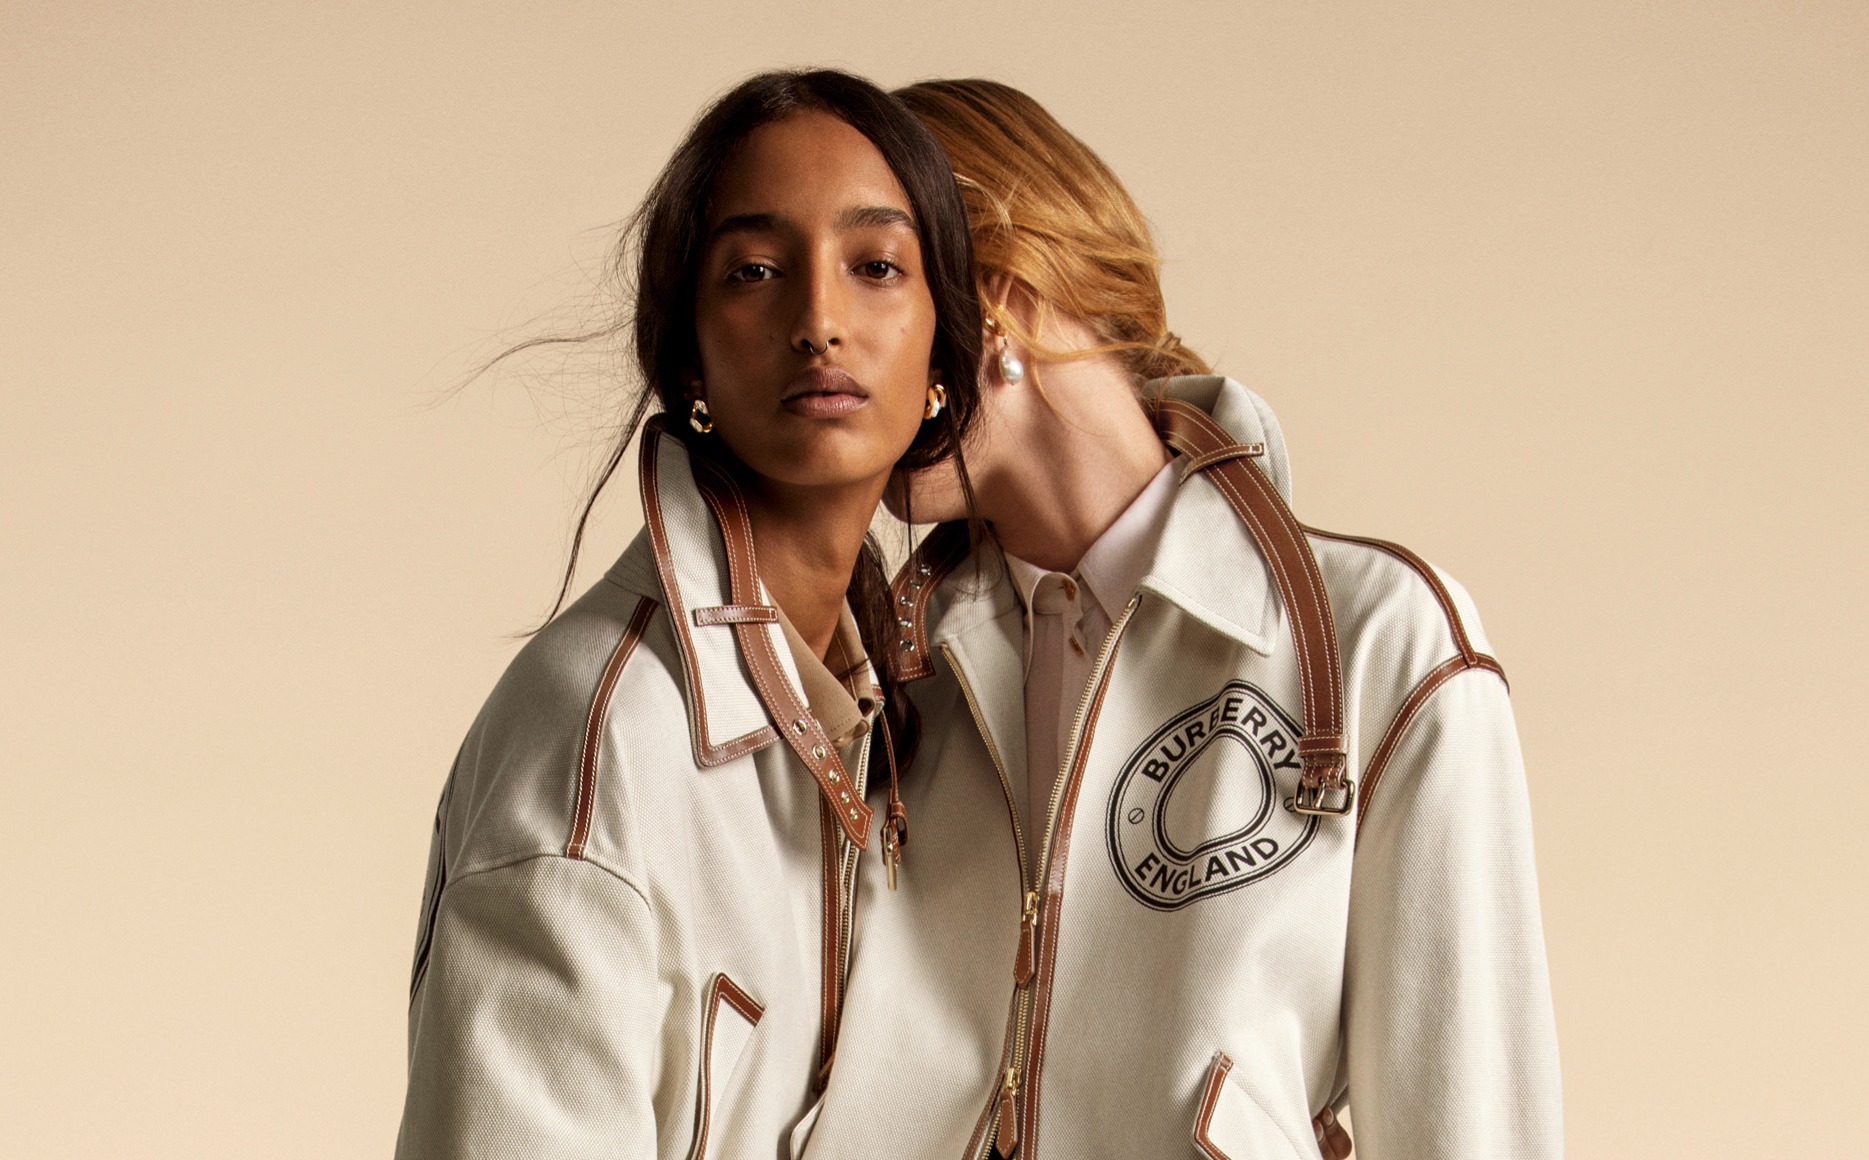 Arriba 34+ imagen burberry diversity and inclusion - Abzlocal.mx